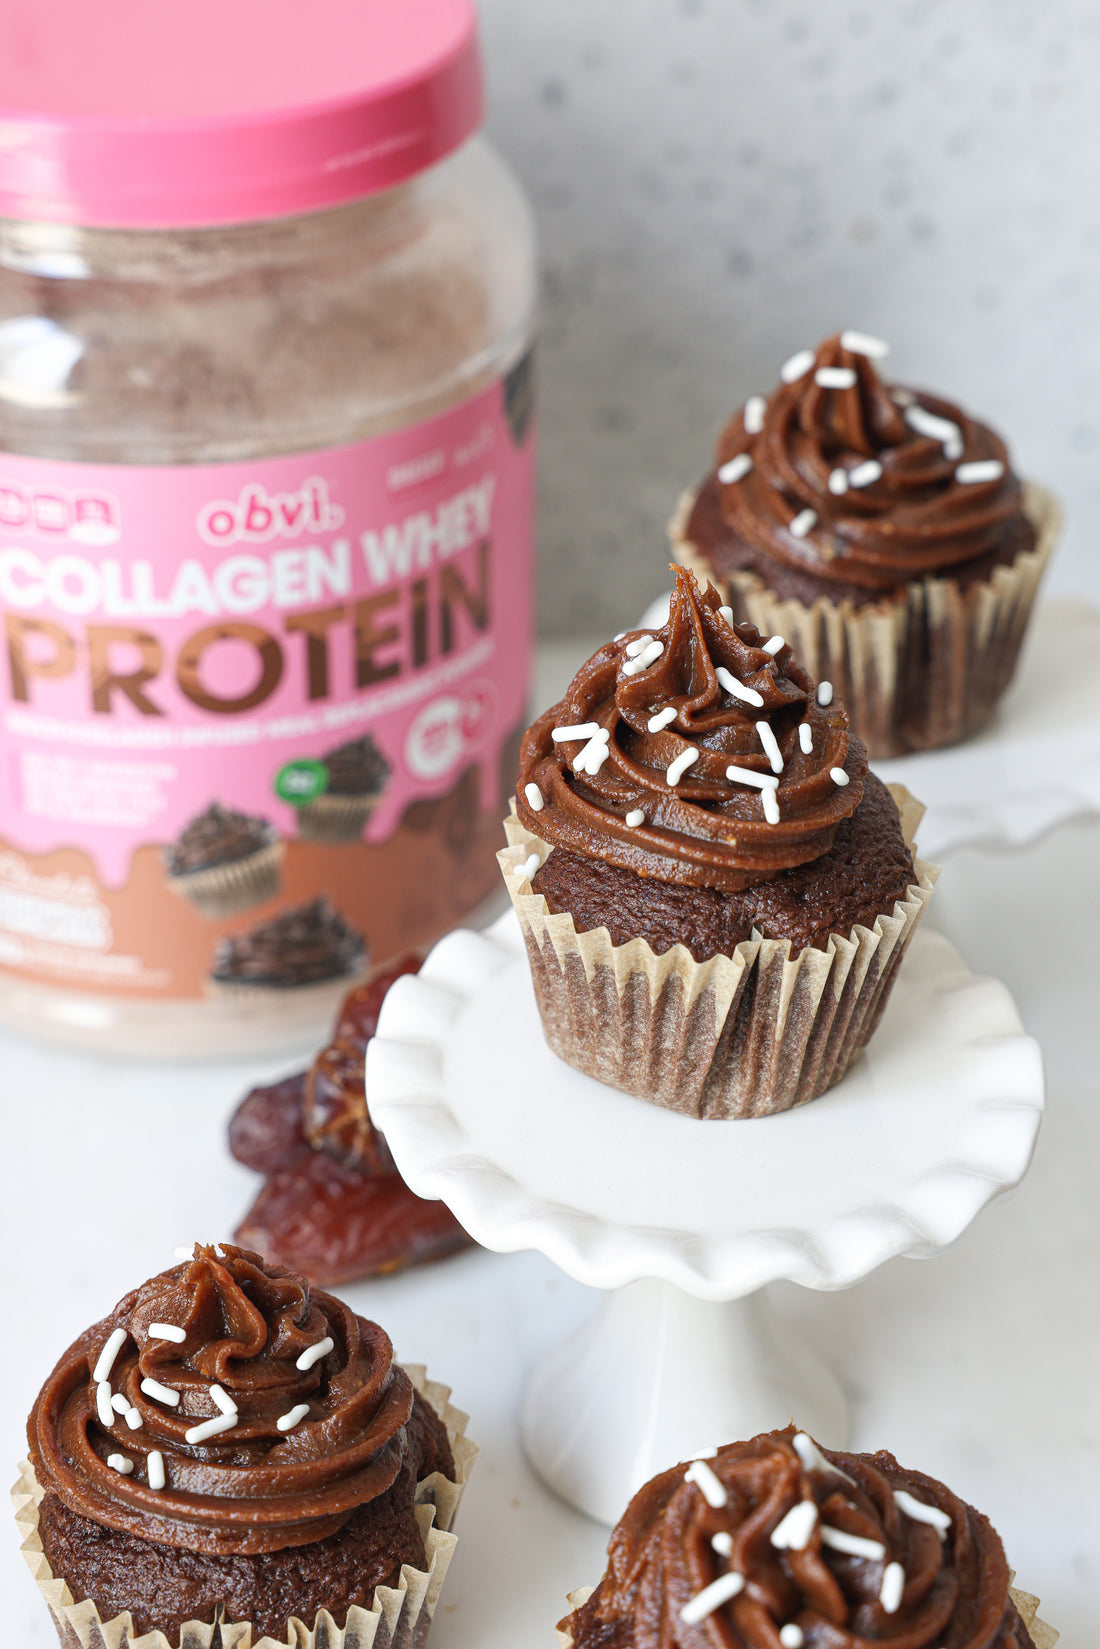 Nutritious Chocolate Cupcakes with a Date Frosting